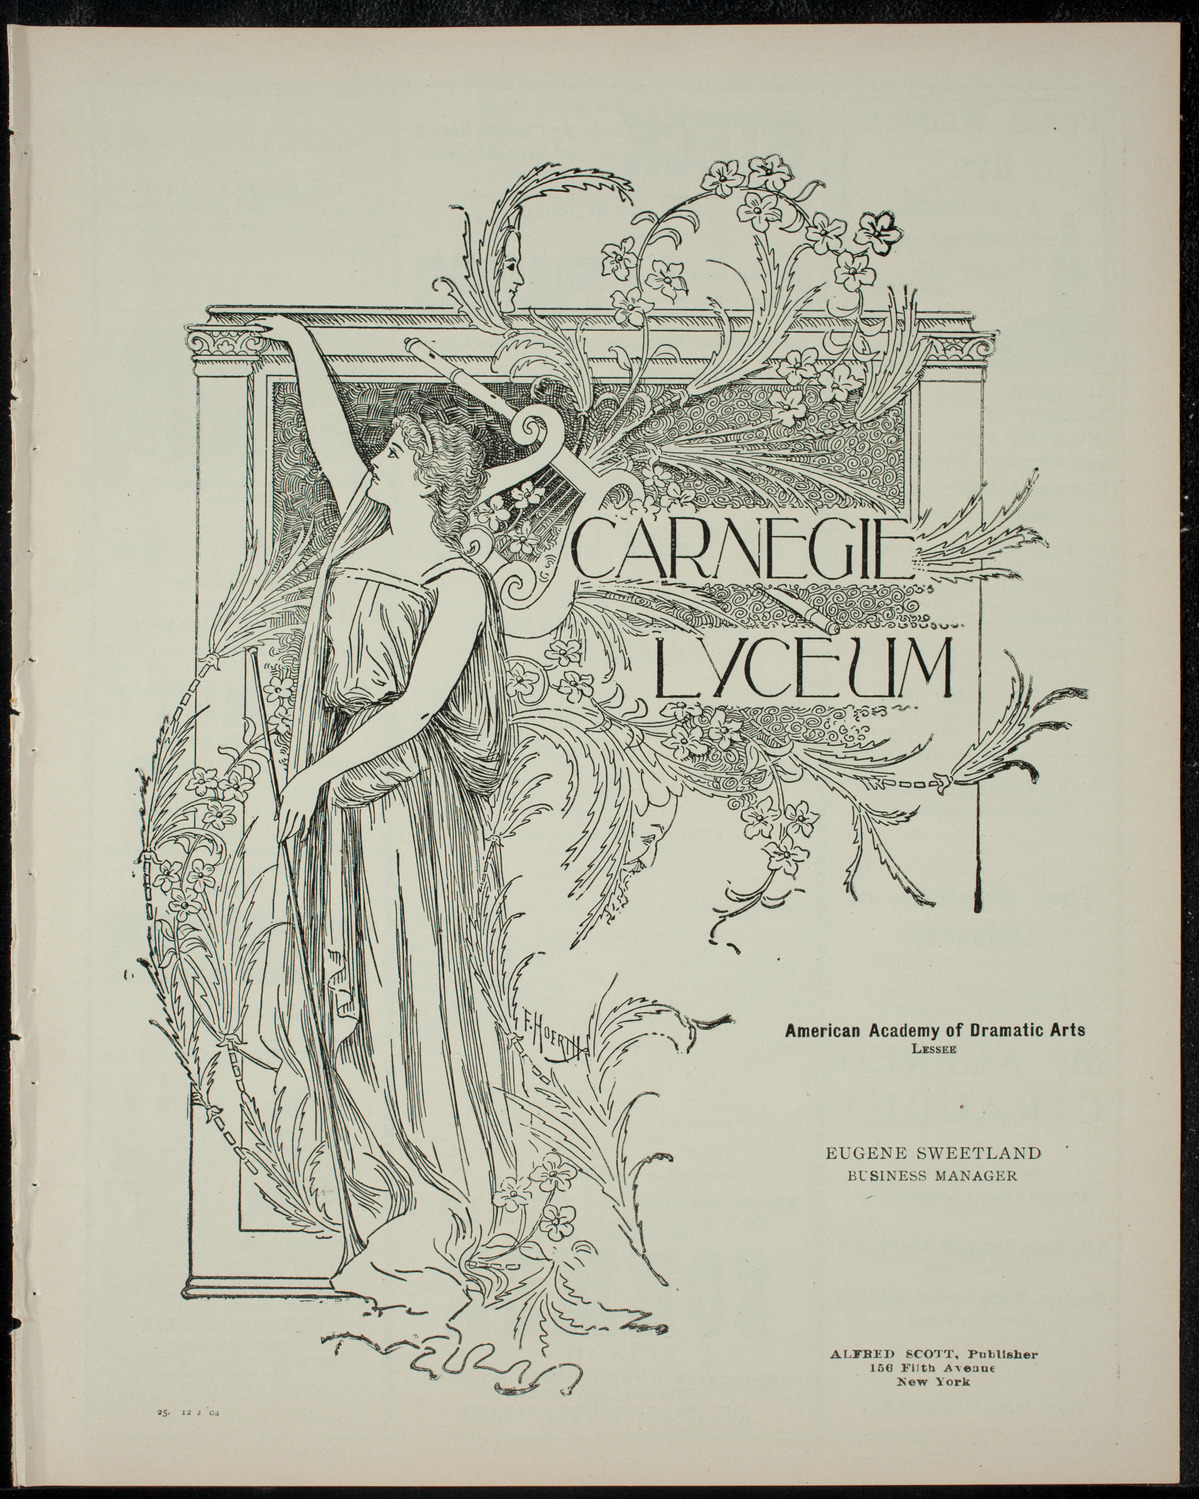 Sixth Annual Dramatic Performance For the Benefit of The Hudson Guild Library, December 2, 1904, program page 1